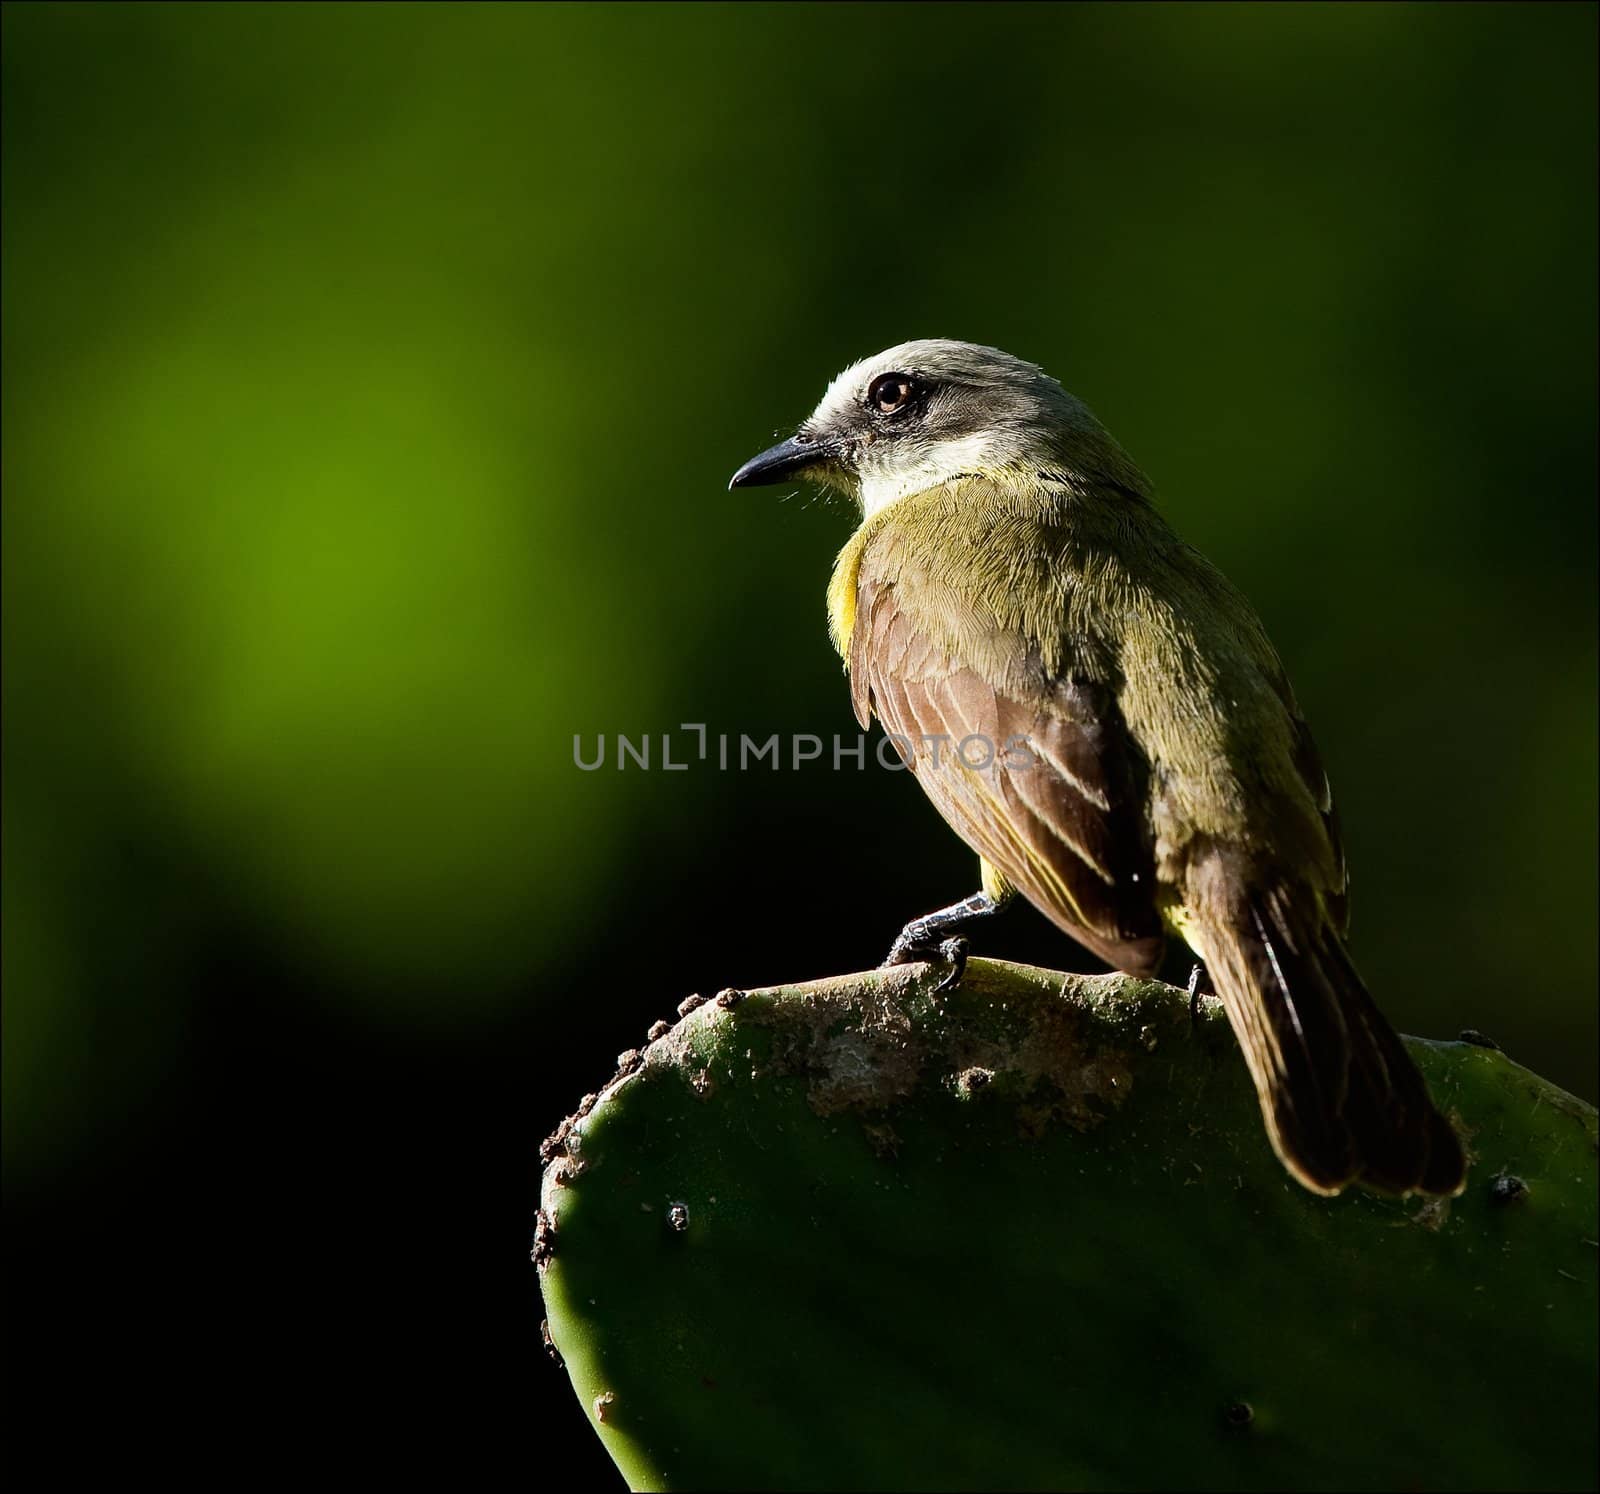 Bird on a cactus leaf. The bird sits on the cactus leaf, shined with the sun.